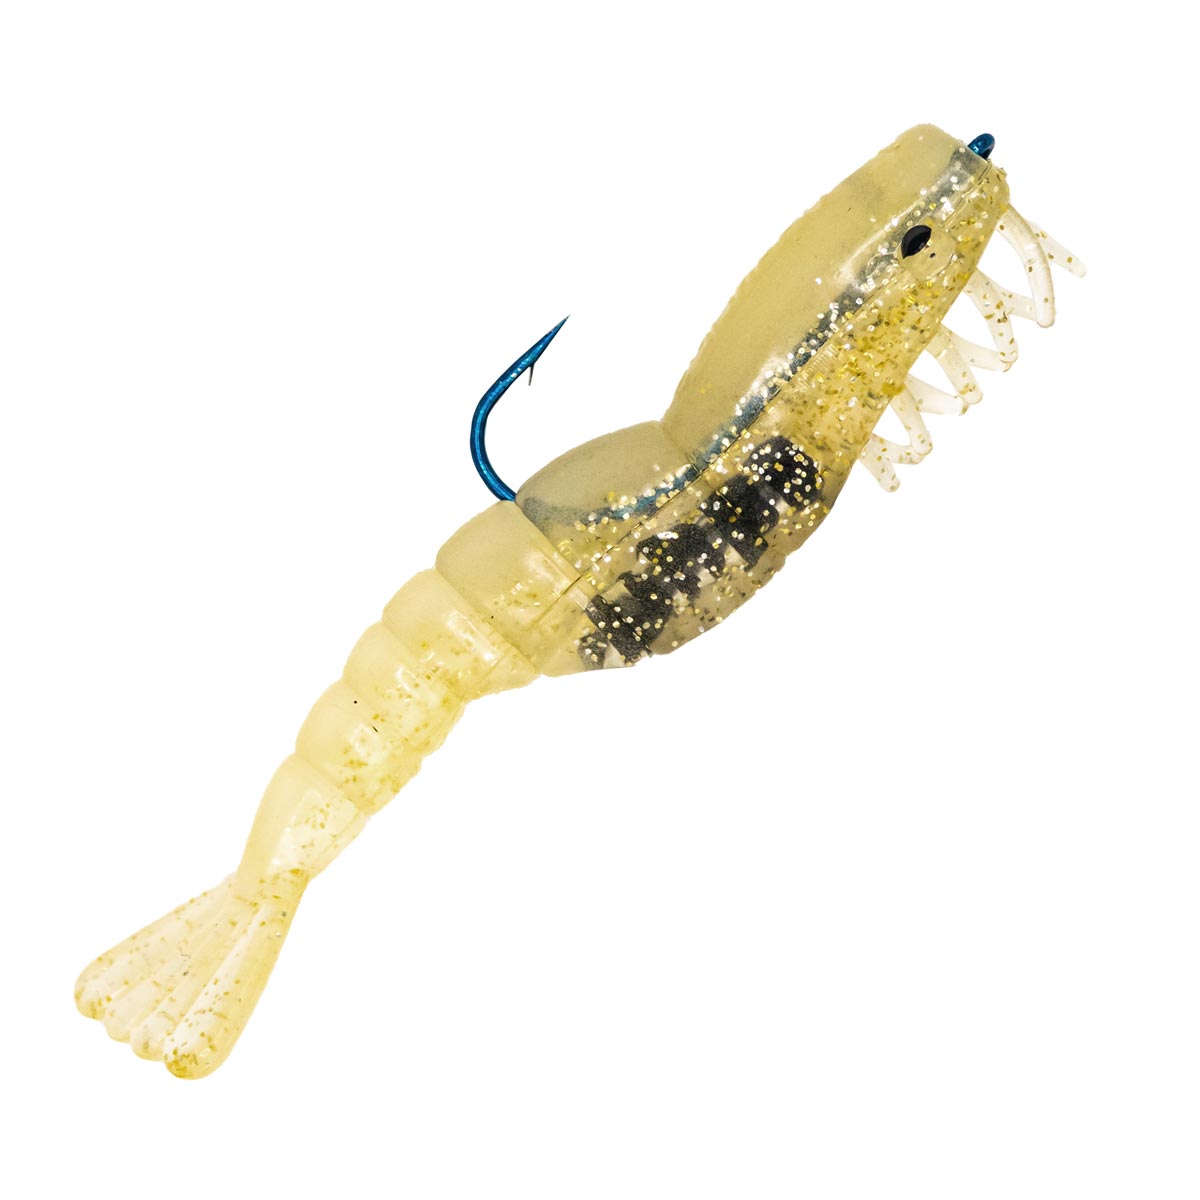 Charlie's Worms Pompano Bucktail Jigs Freshwater Saltwater Fishing Lures  2Pk